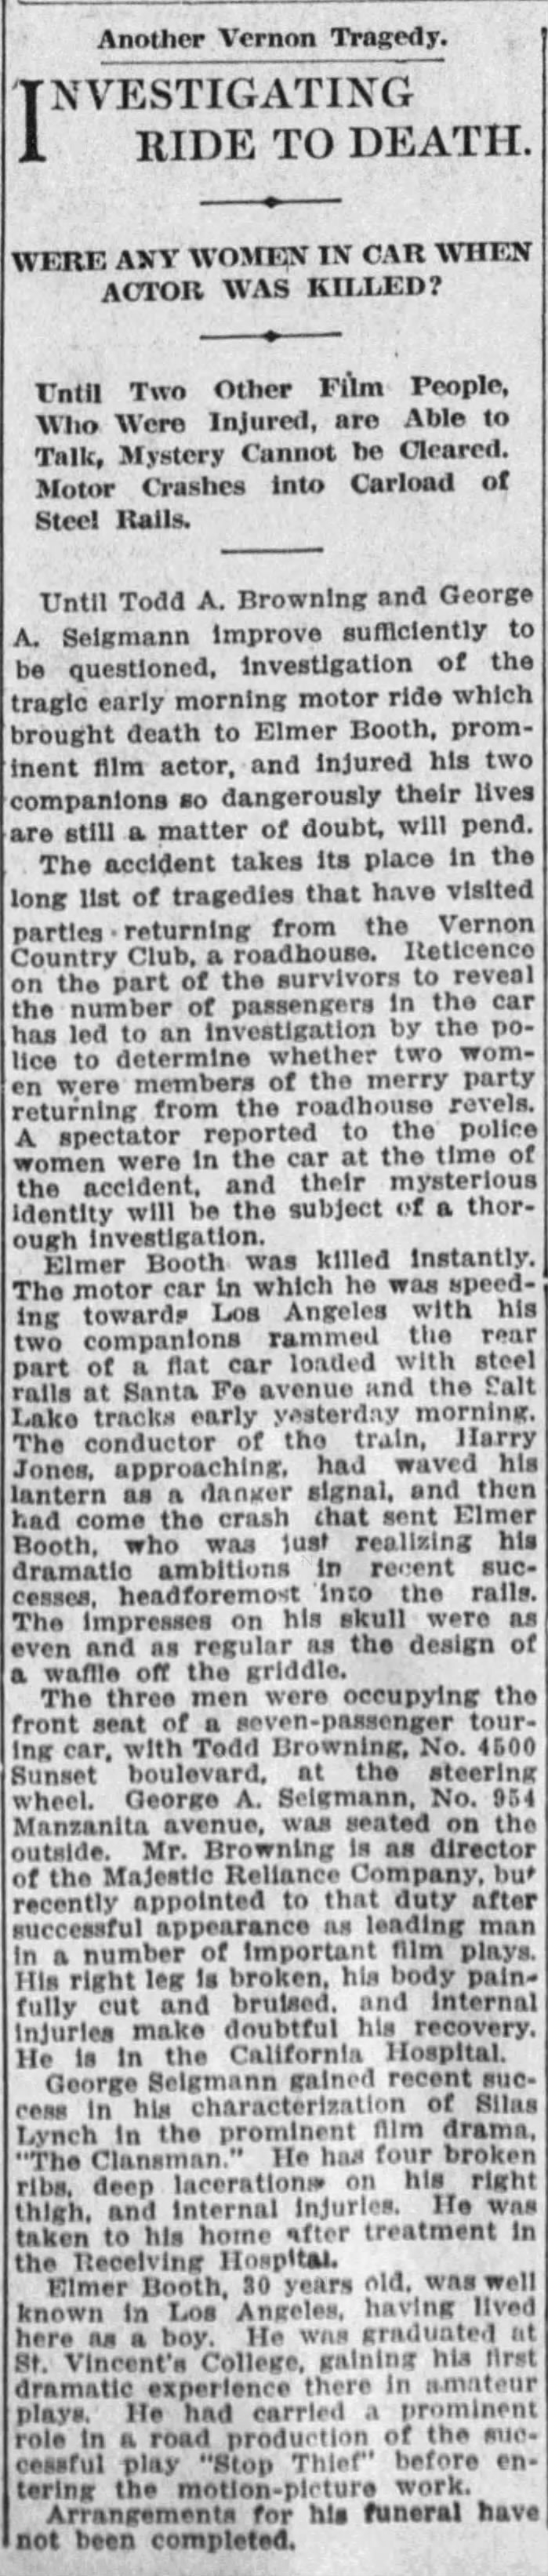 Article about the accident that killed Elmer Booth, Los Angeles Times, 17 June 1915